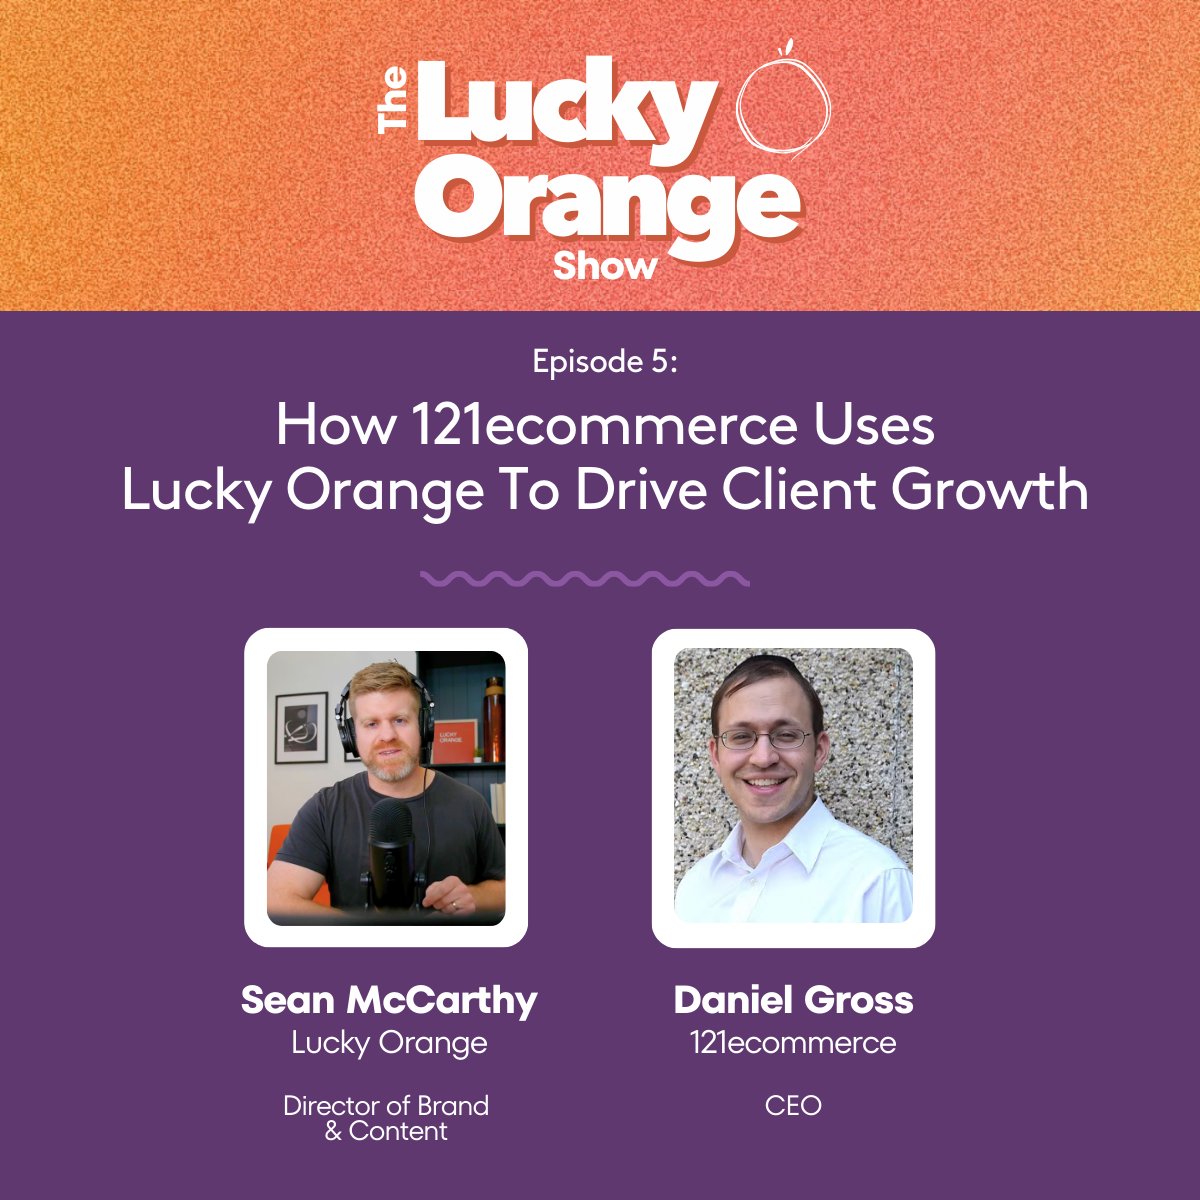 📣 'When a person lands on your site, they're walking into your store.' 📣

Check out the full interview from our CEO, Daniel, on The @luckyorange Show! 

💻 YouTube: 121e.co/3wuBOP6
🎧 Spotify: 121e.co/3ORjEh0

#ConversionRates #CRO #eCommerce